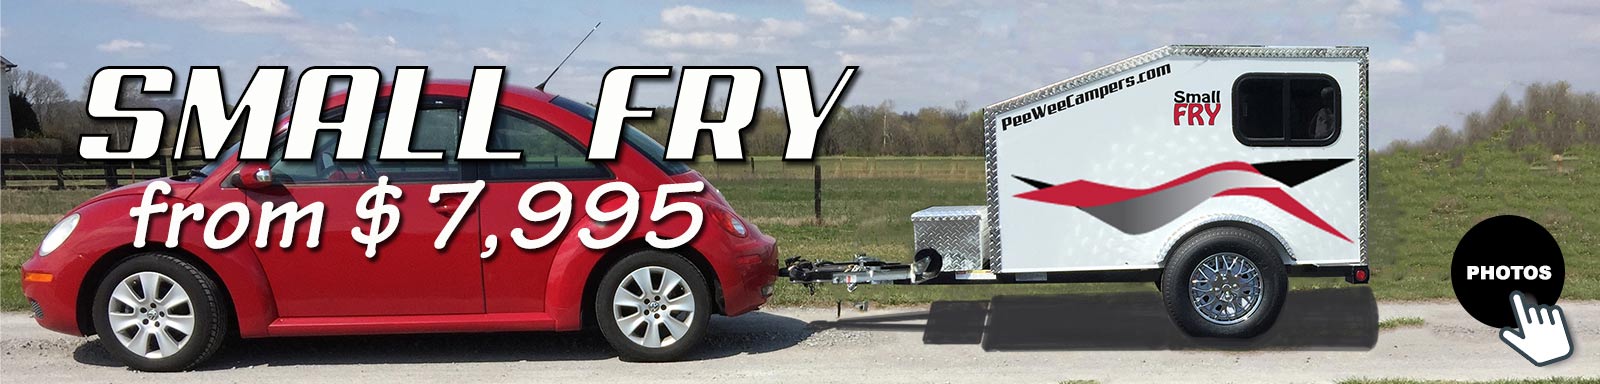 Small Fry Teardrop Trailer Features and Options